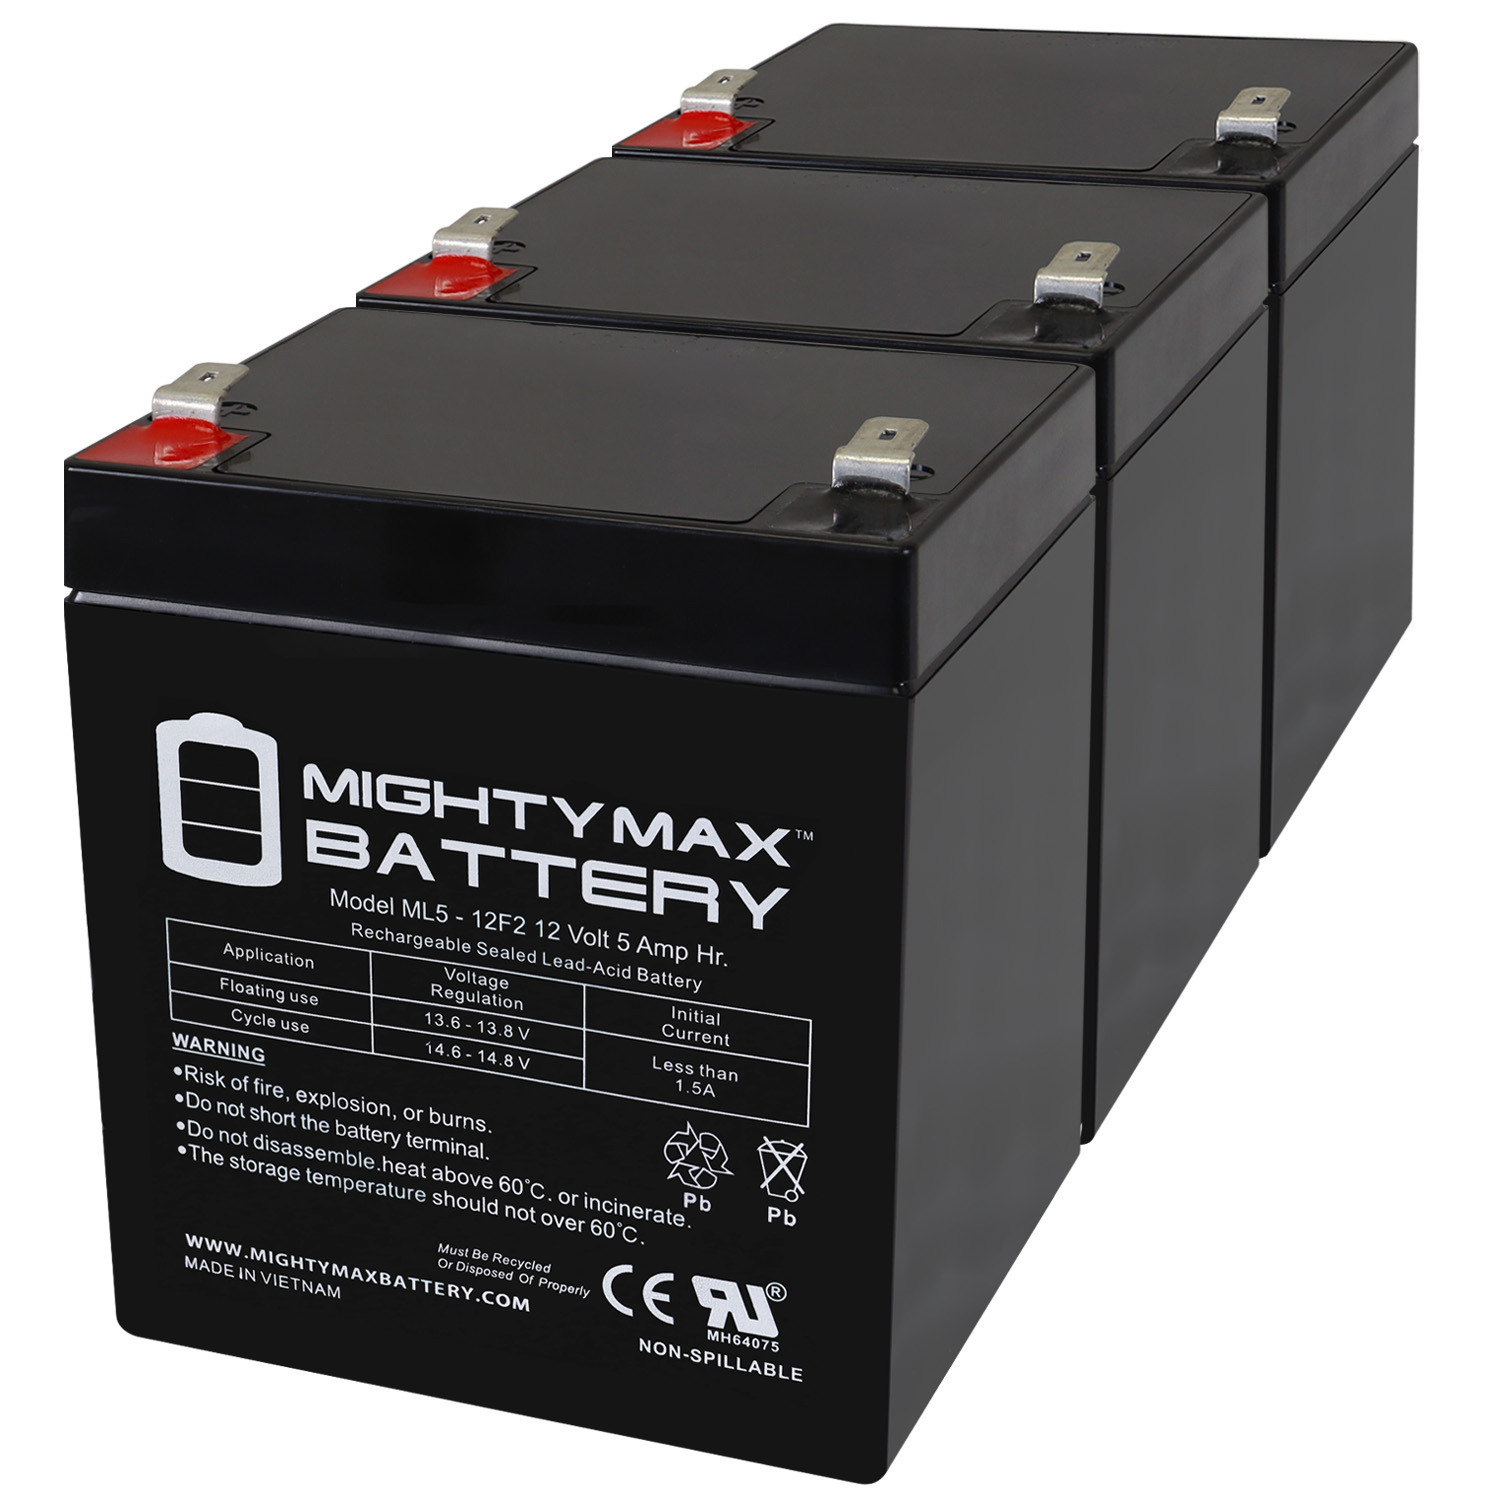 12V 5Ah F2 SLA Replacement Battery for Unisys PW5125 2400i RM - 3 Pack